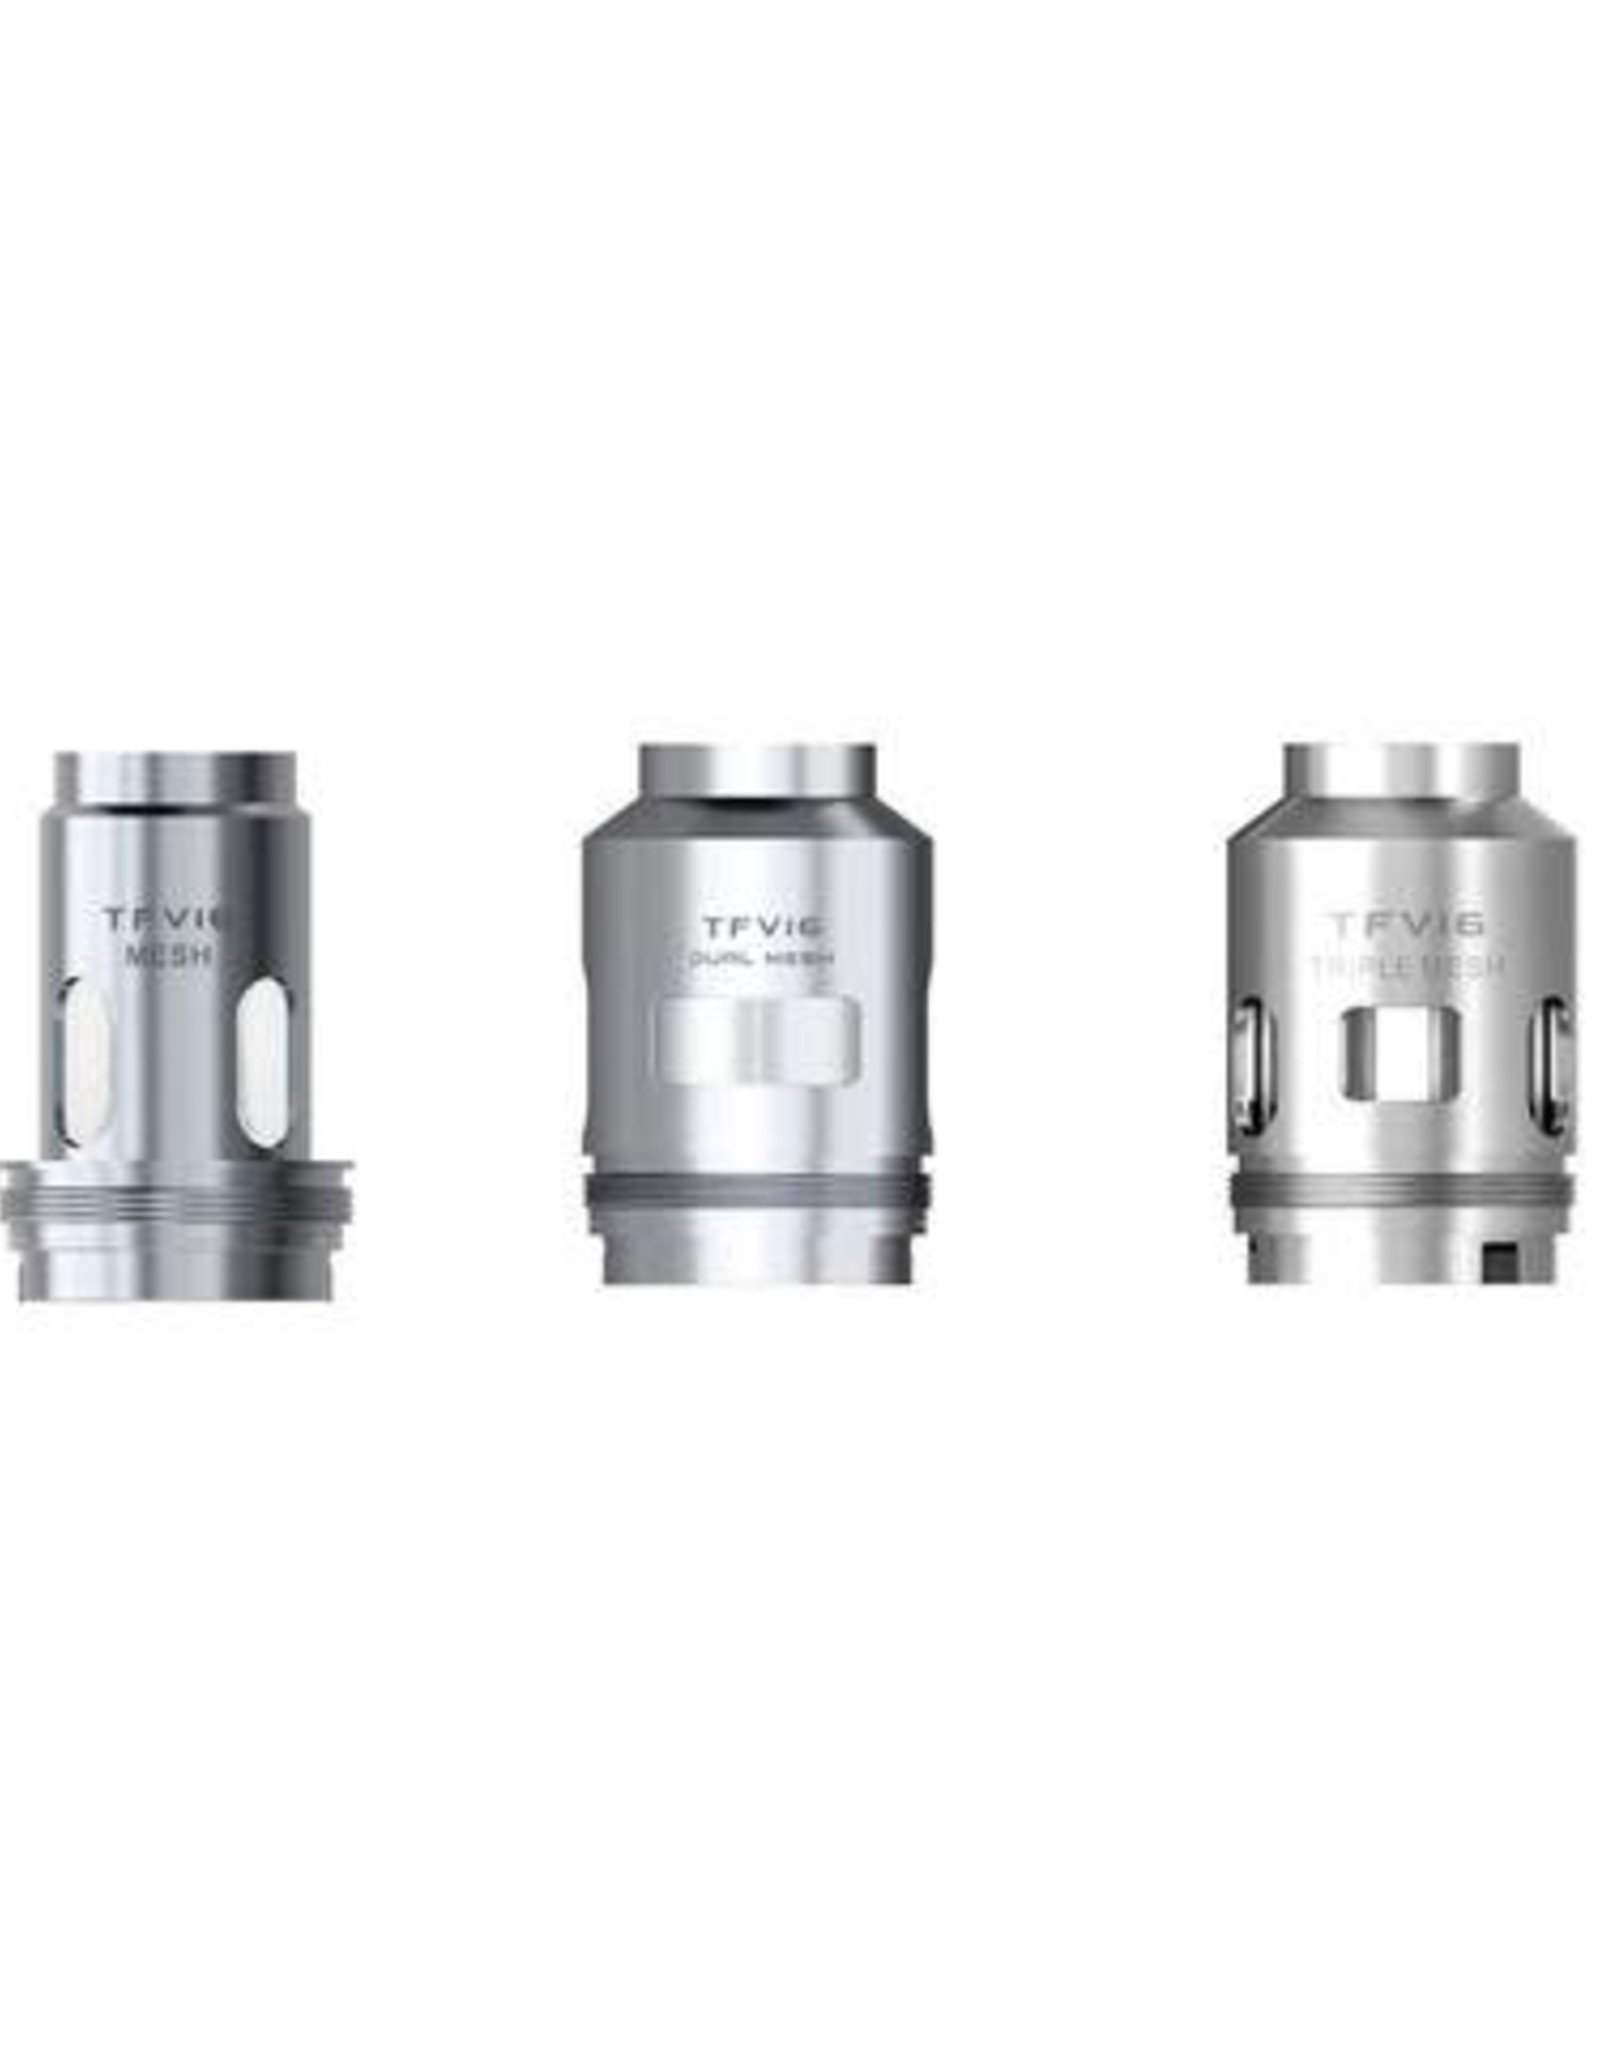 SMOK TFV16 REPLACEMENT COIL (3 PACK)